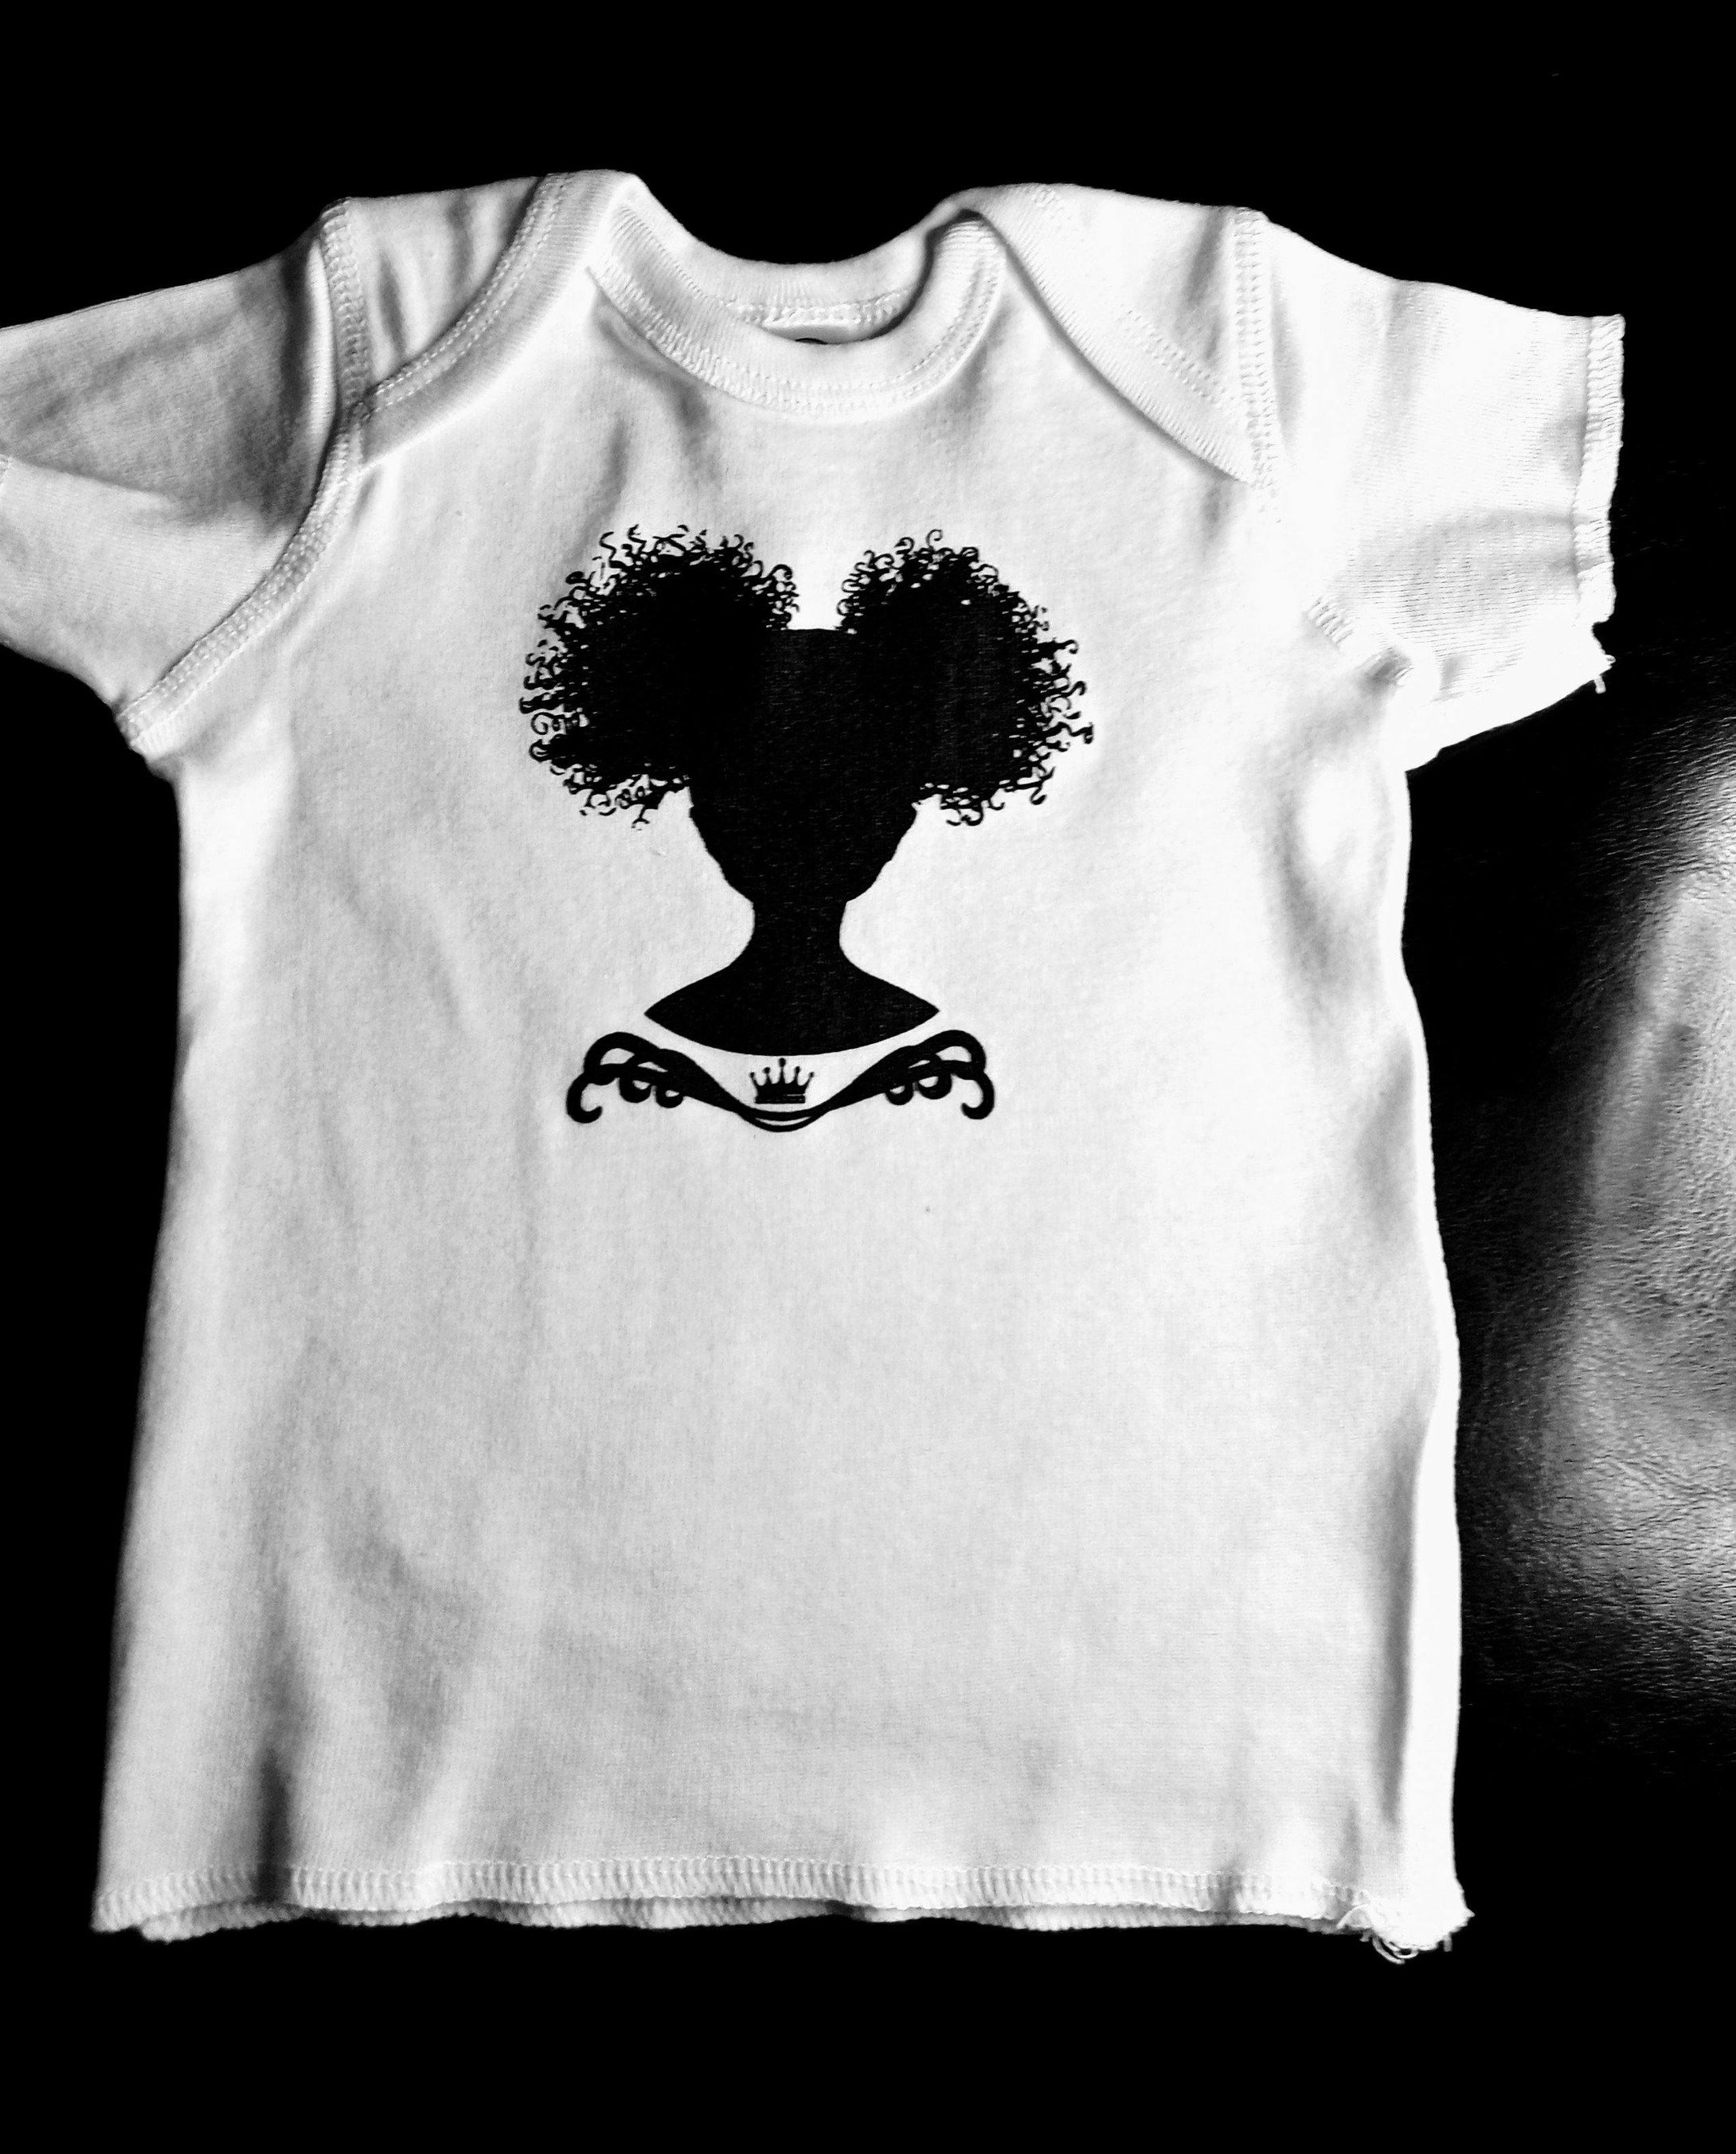 Afro Puff Baby Gurl Shortsleeve Tee - Sticks and Stones Tees & More